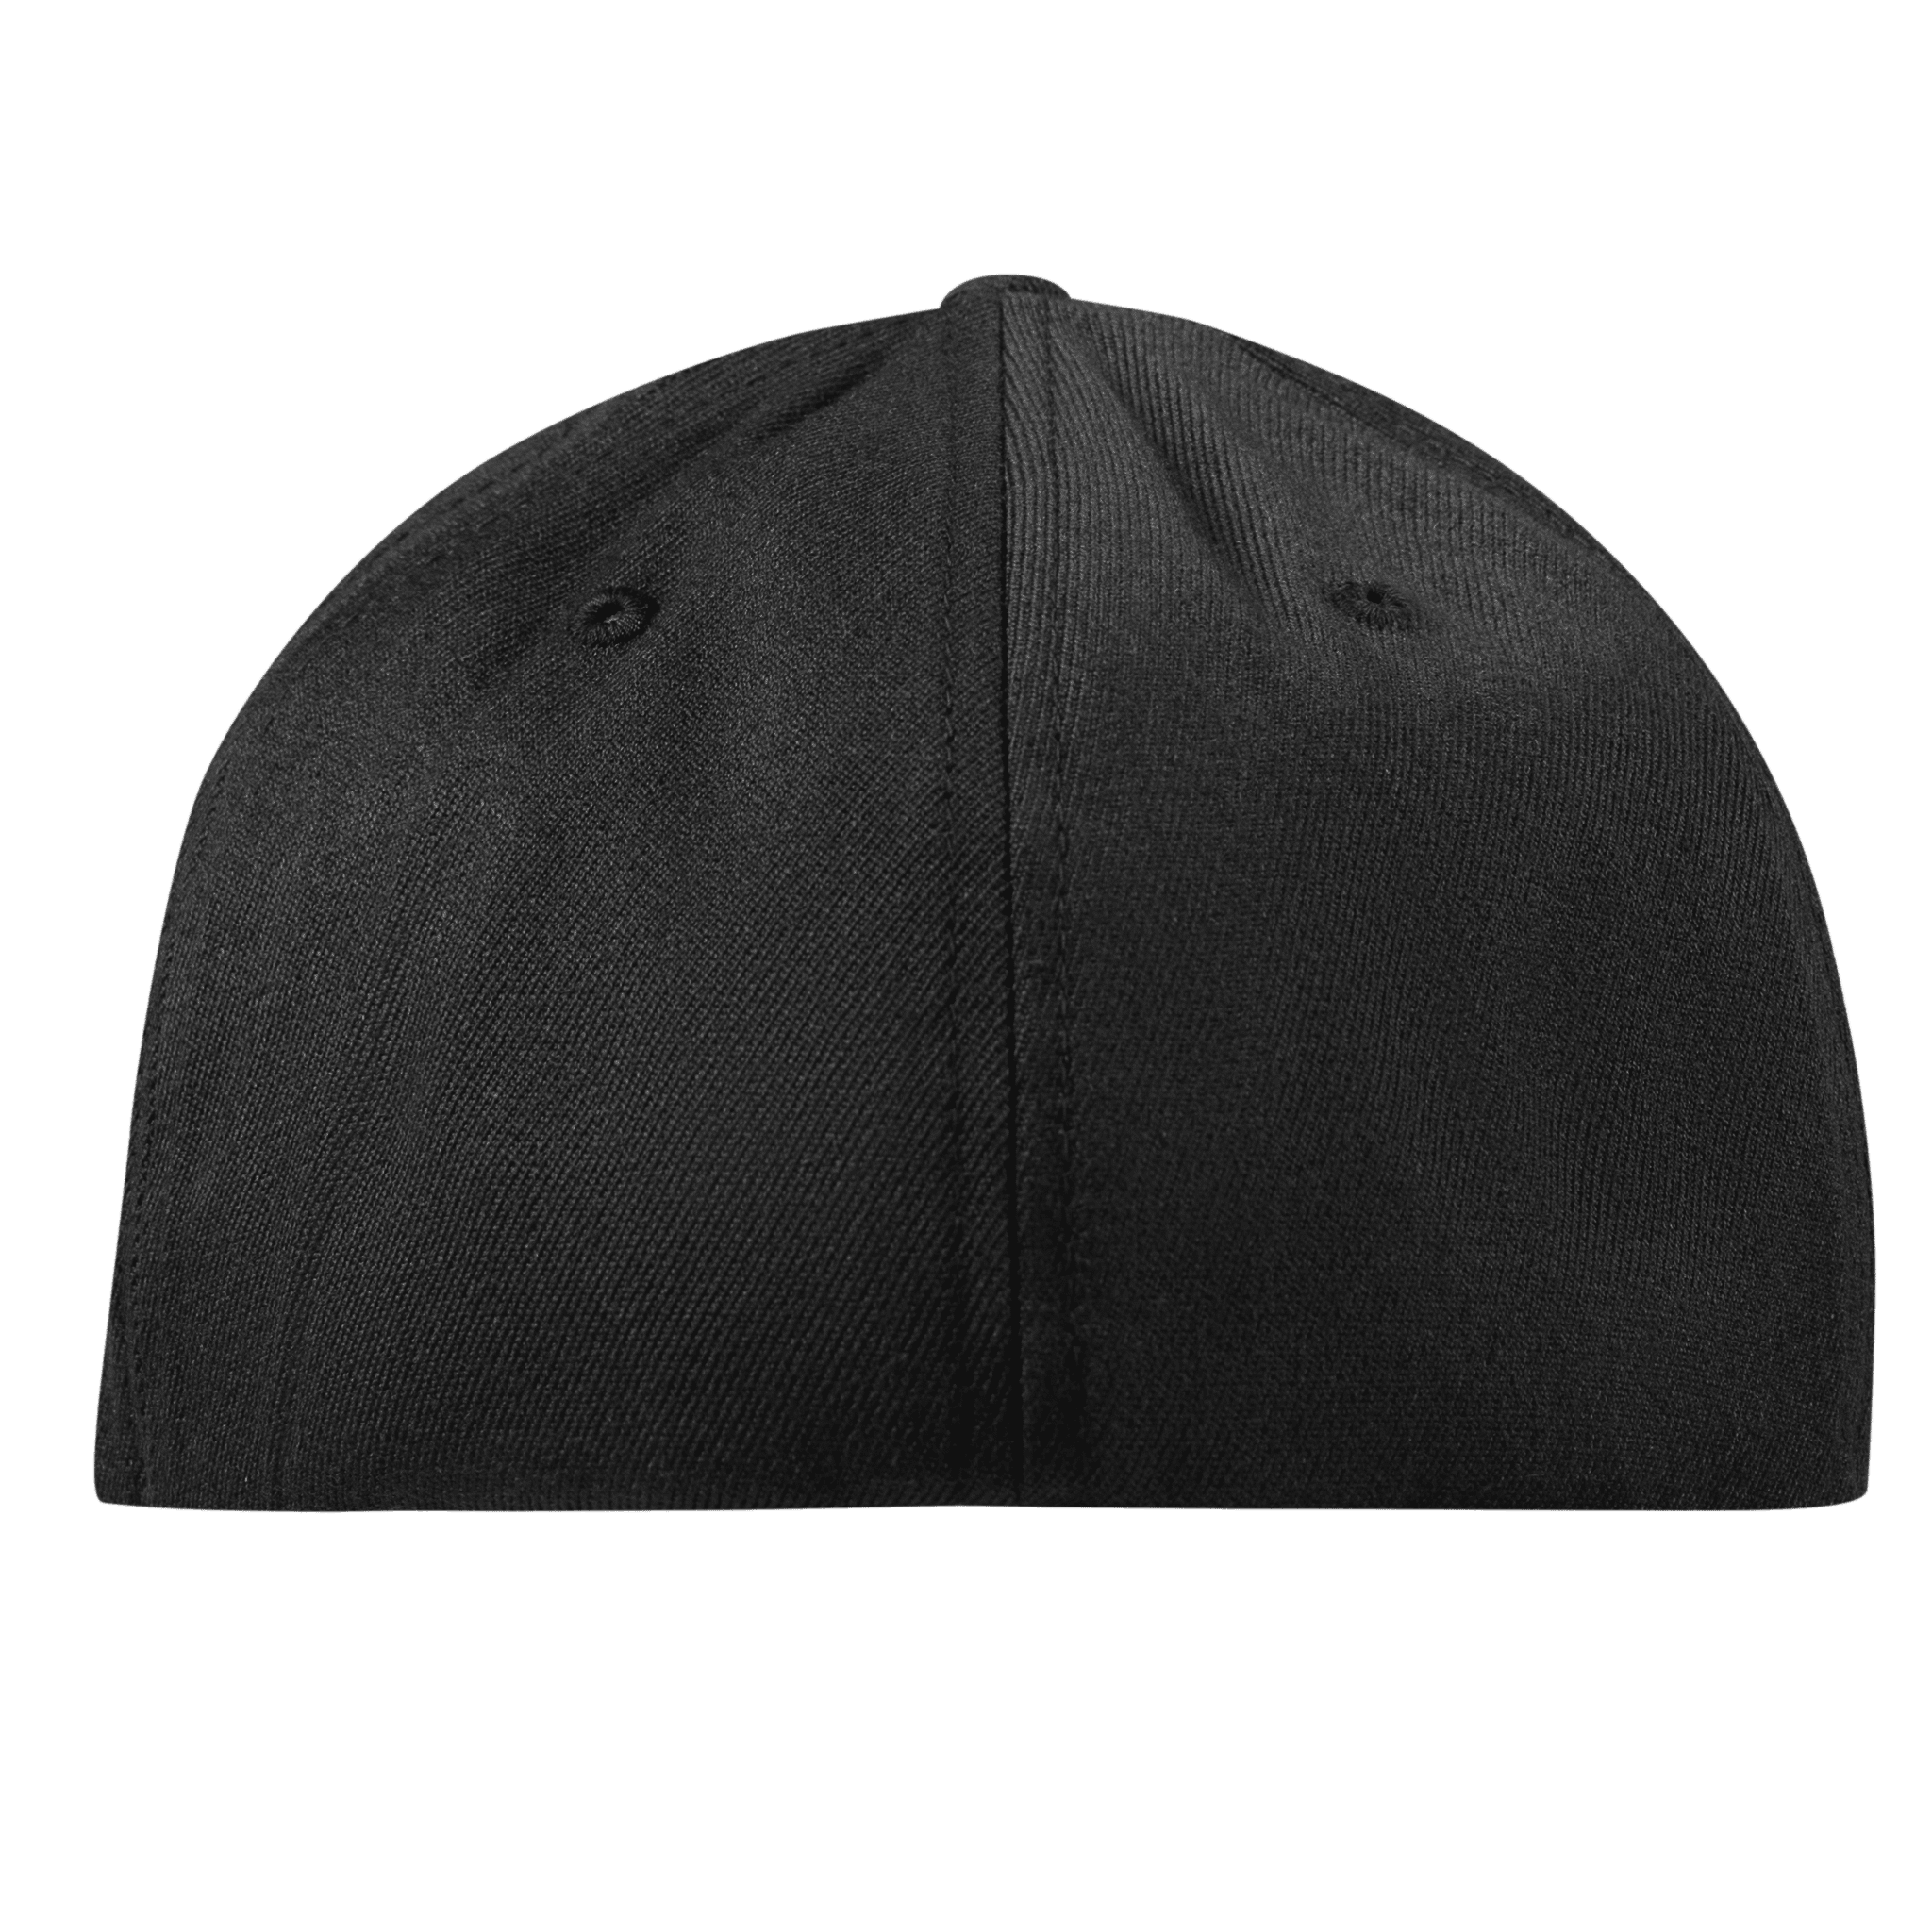 Indiana 19 Midnight Flexfit Fitted Back Black